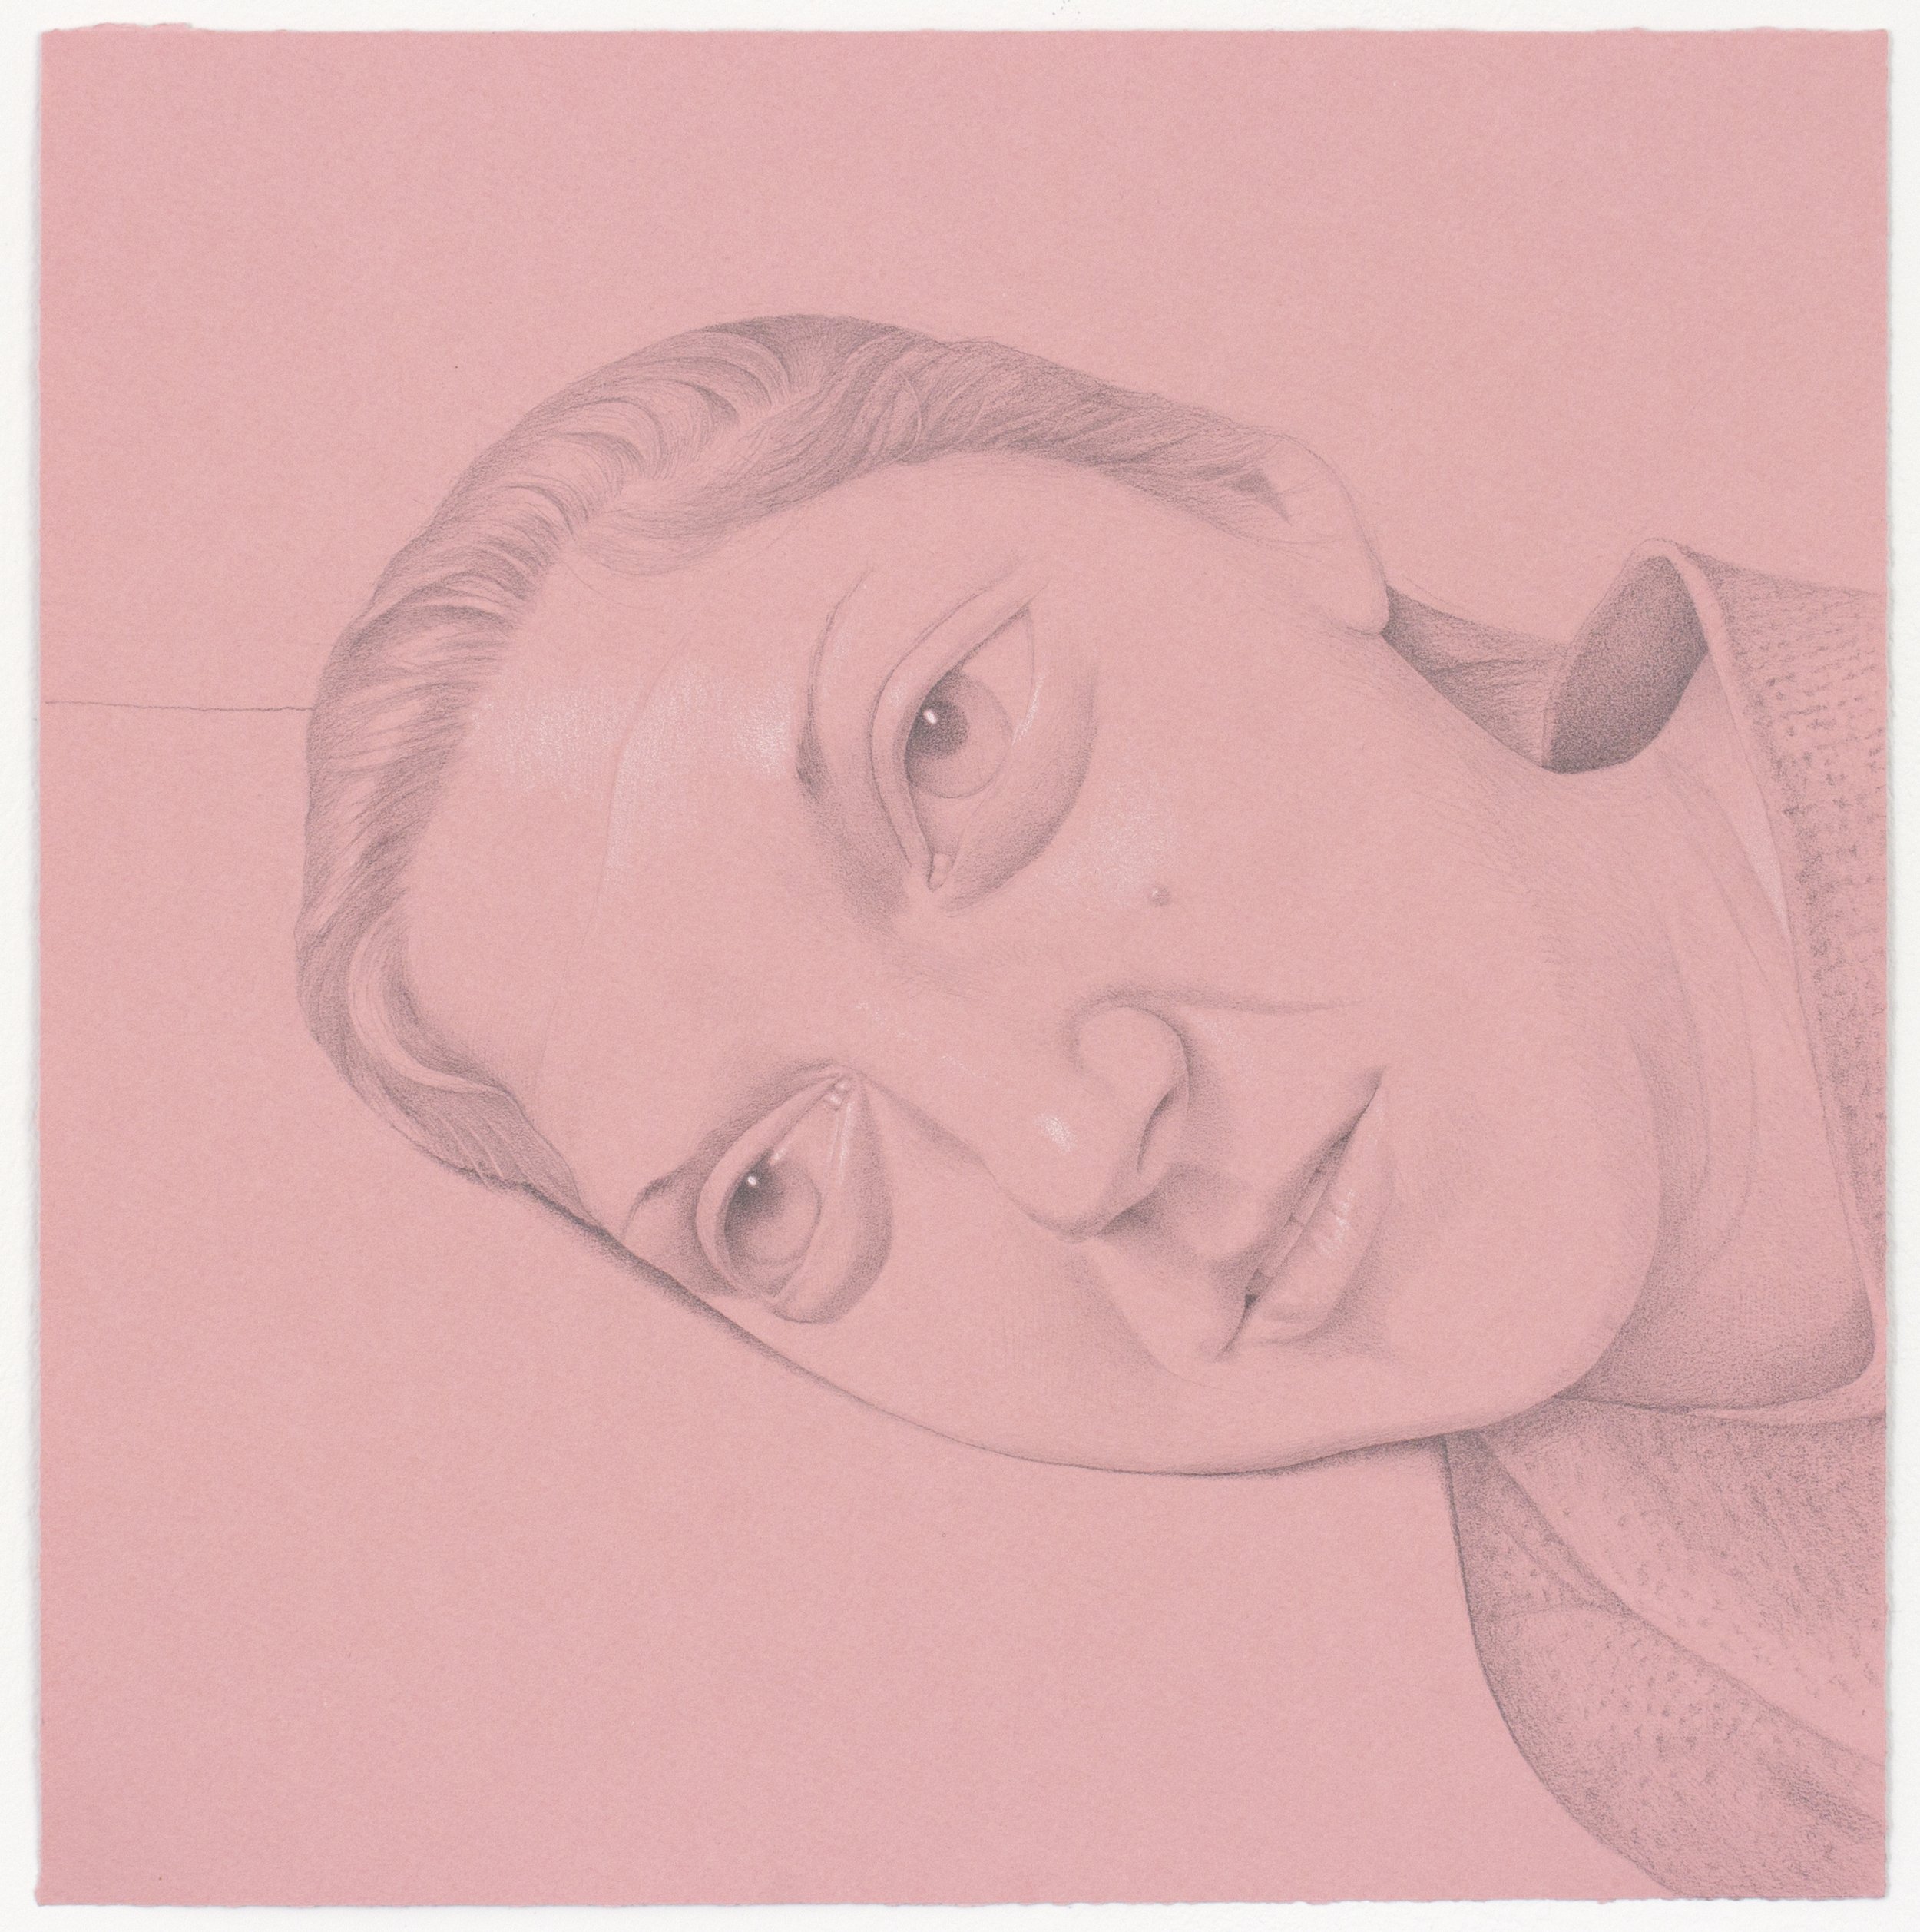 Marcy, 2011-12, Graphite and white chalk on colored paper, 12 x 12 inches